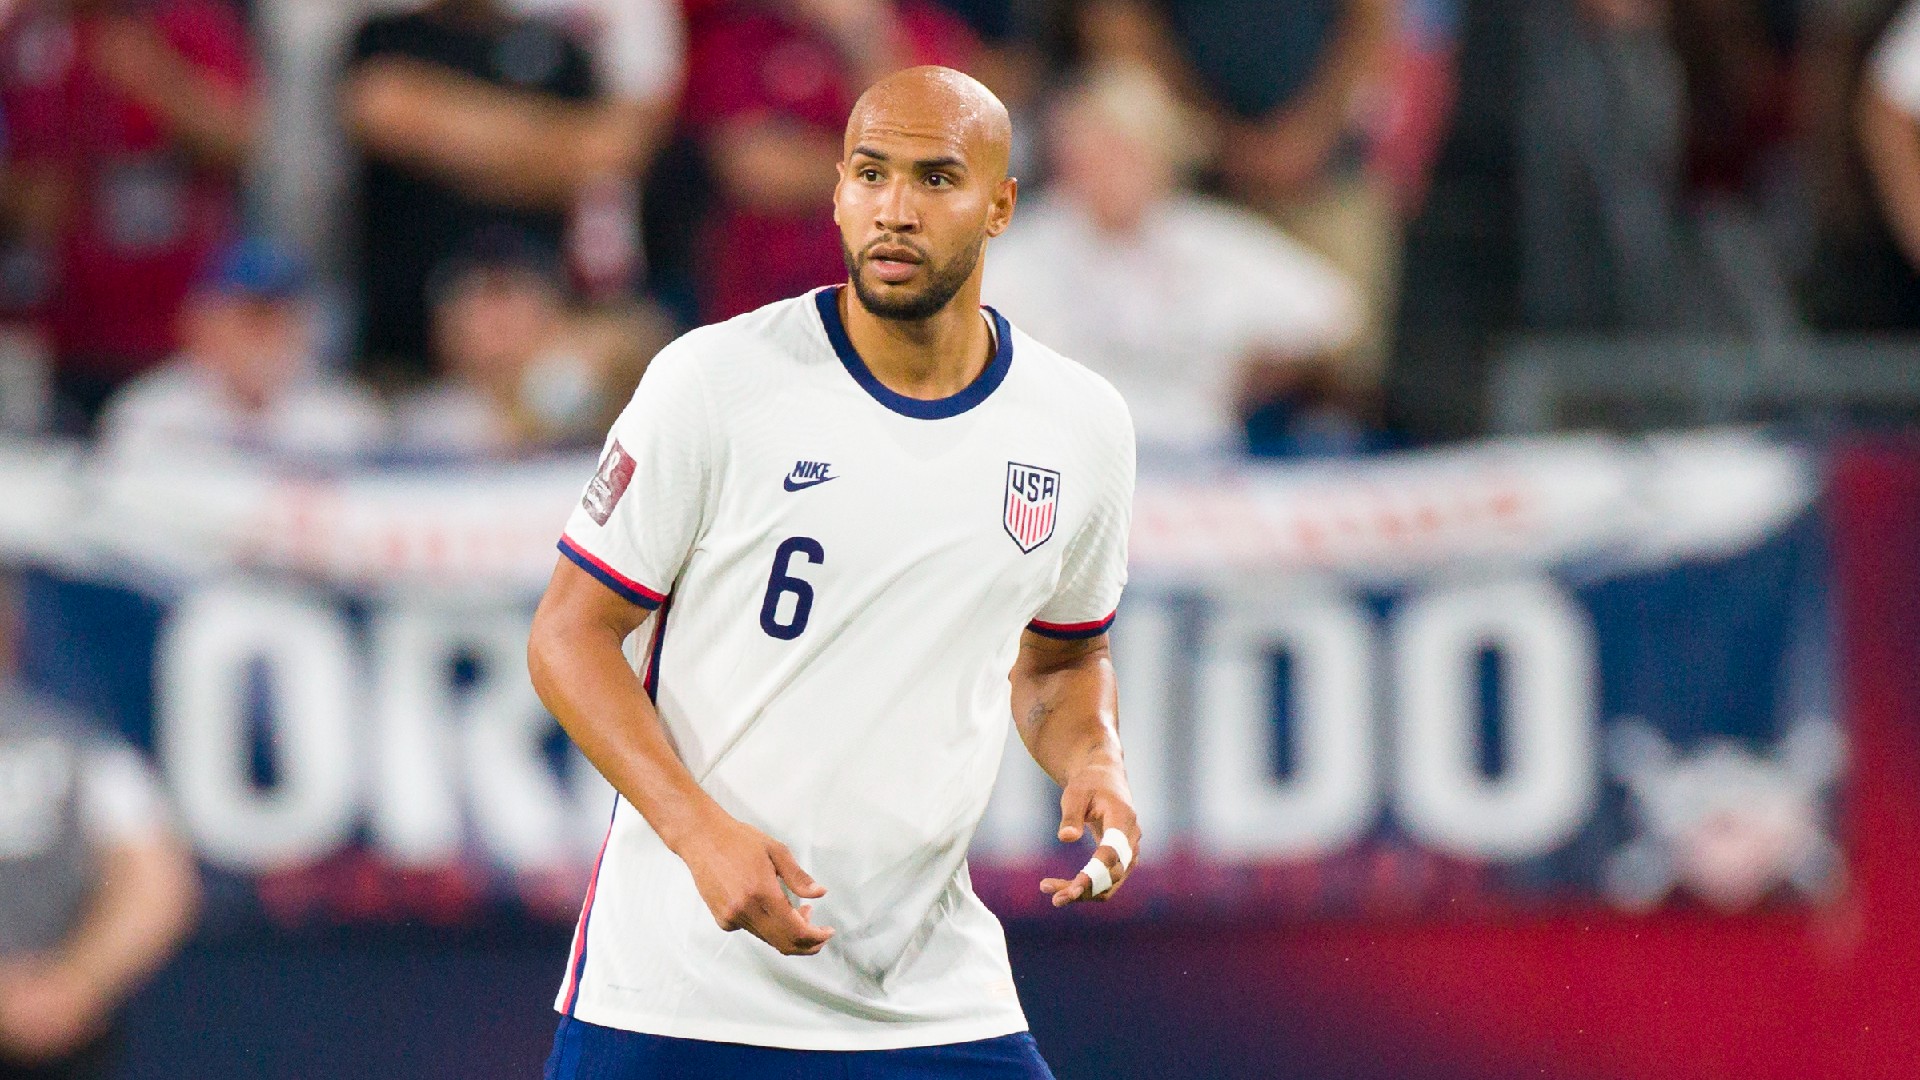 'The decision isn't surprising' - Brooks admits performances haven't been good enough following USMNT exclusion